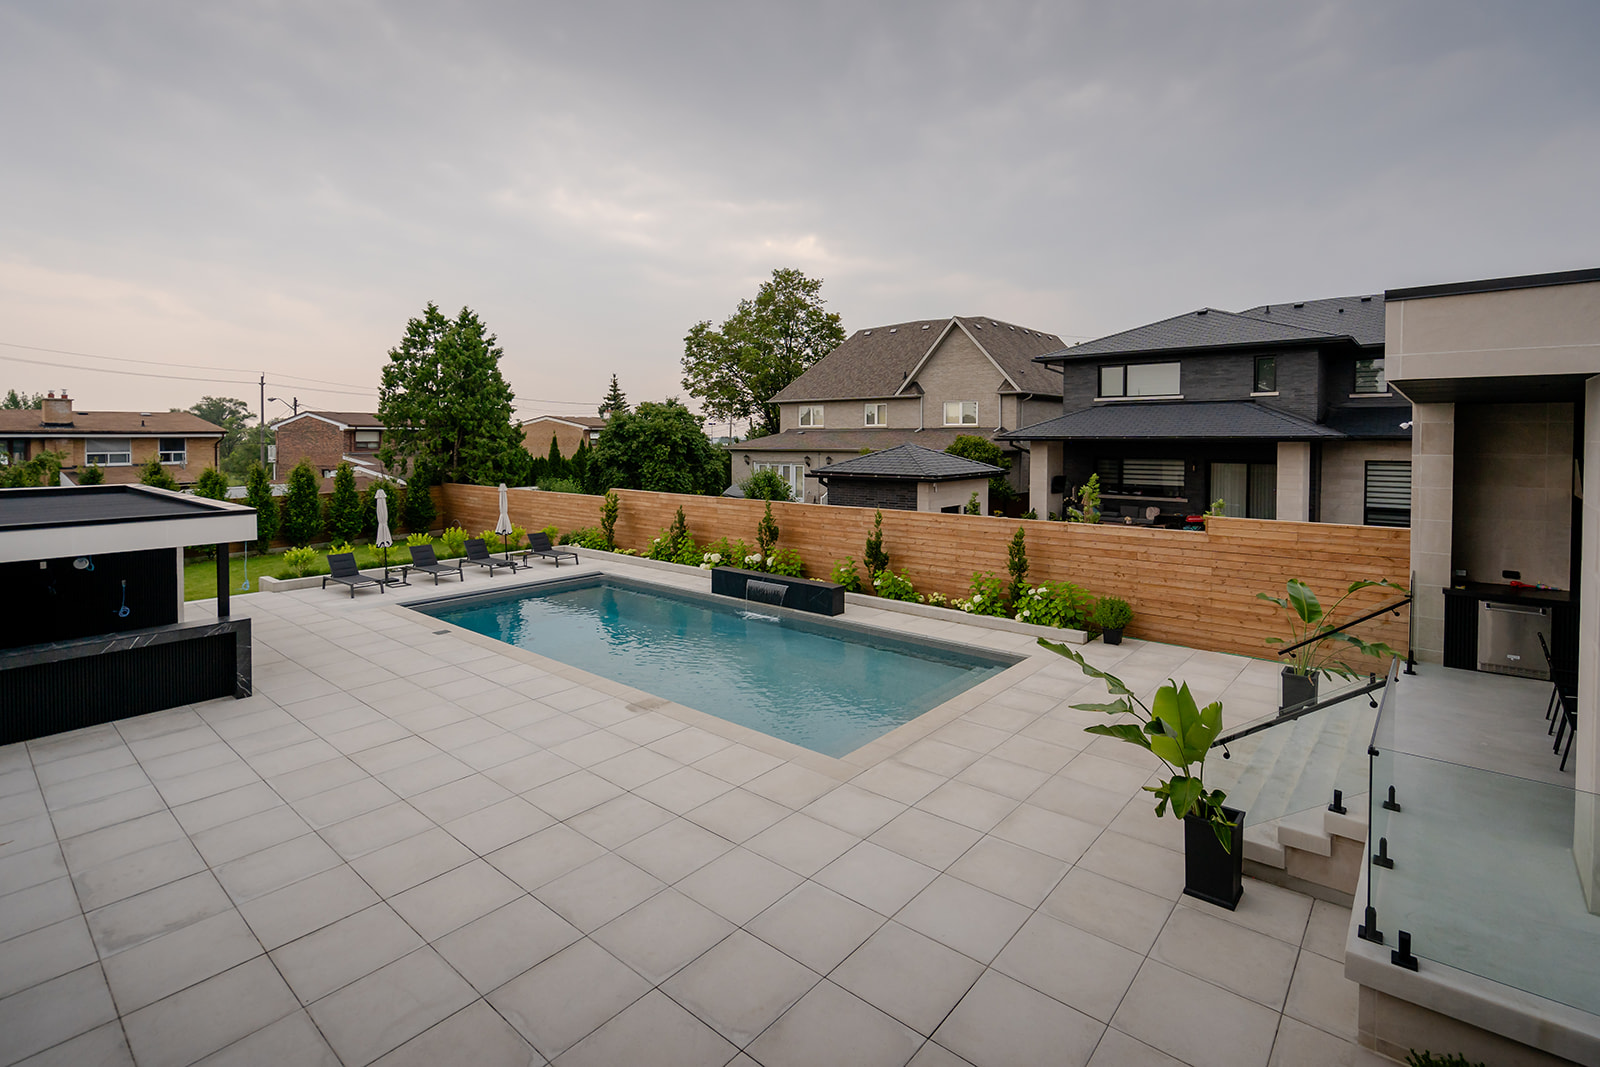 An inground pool surrounded by patio stones.